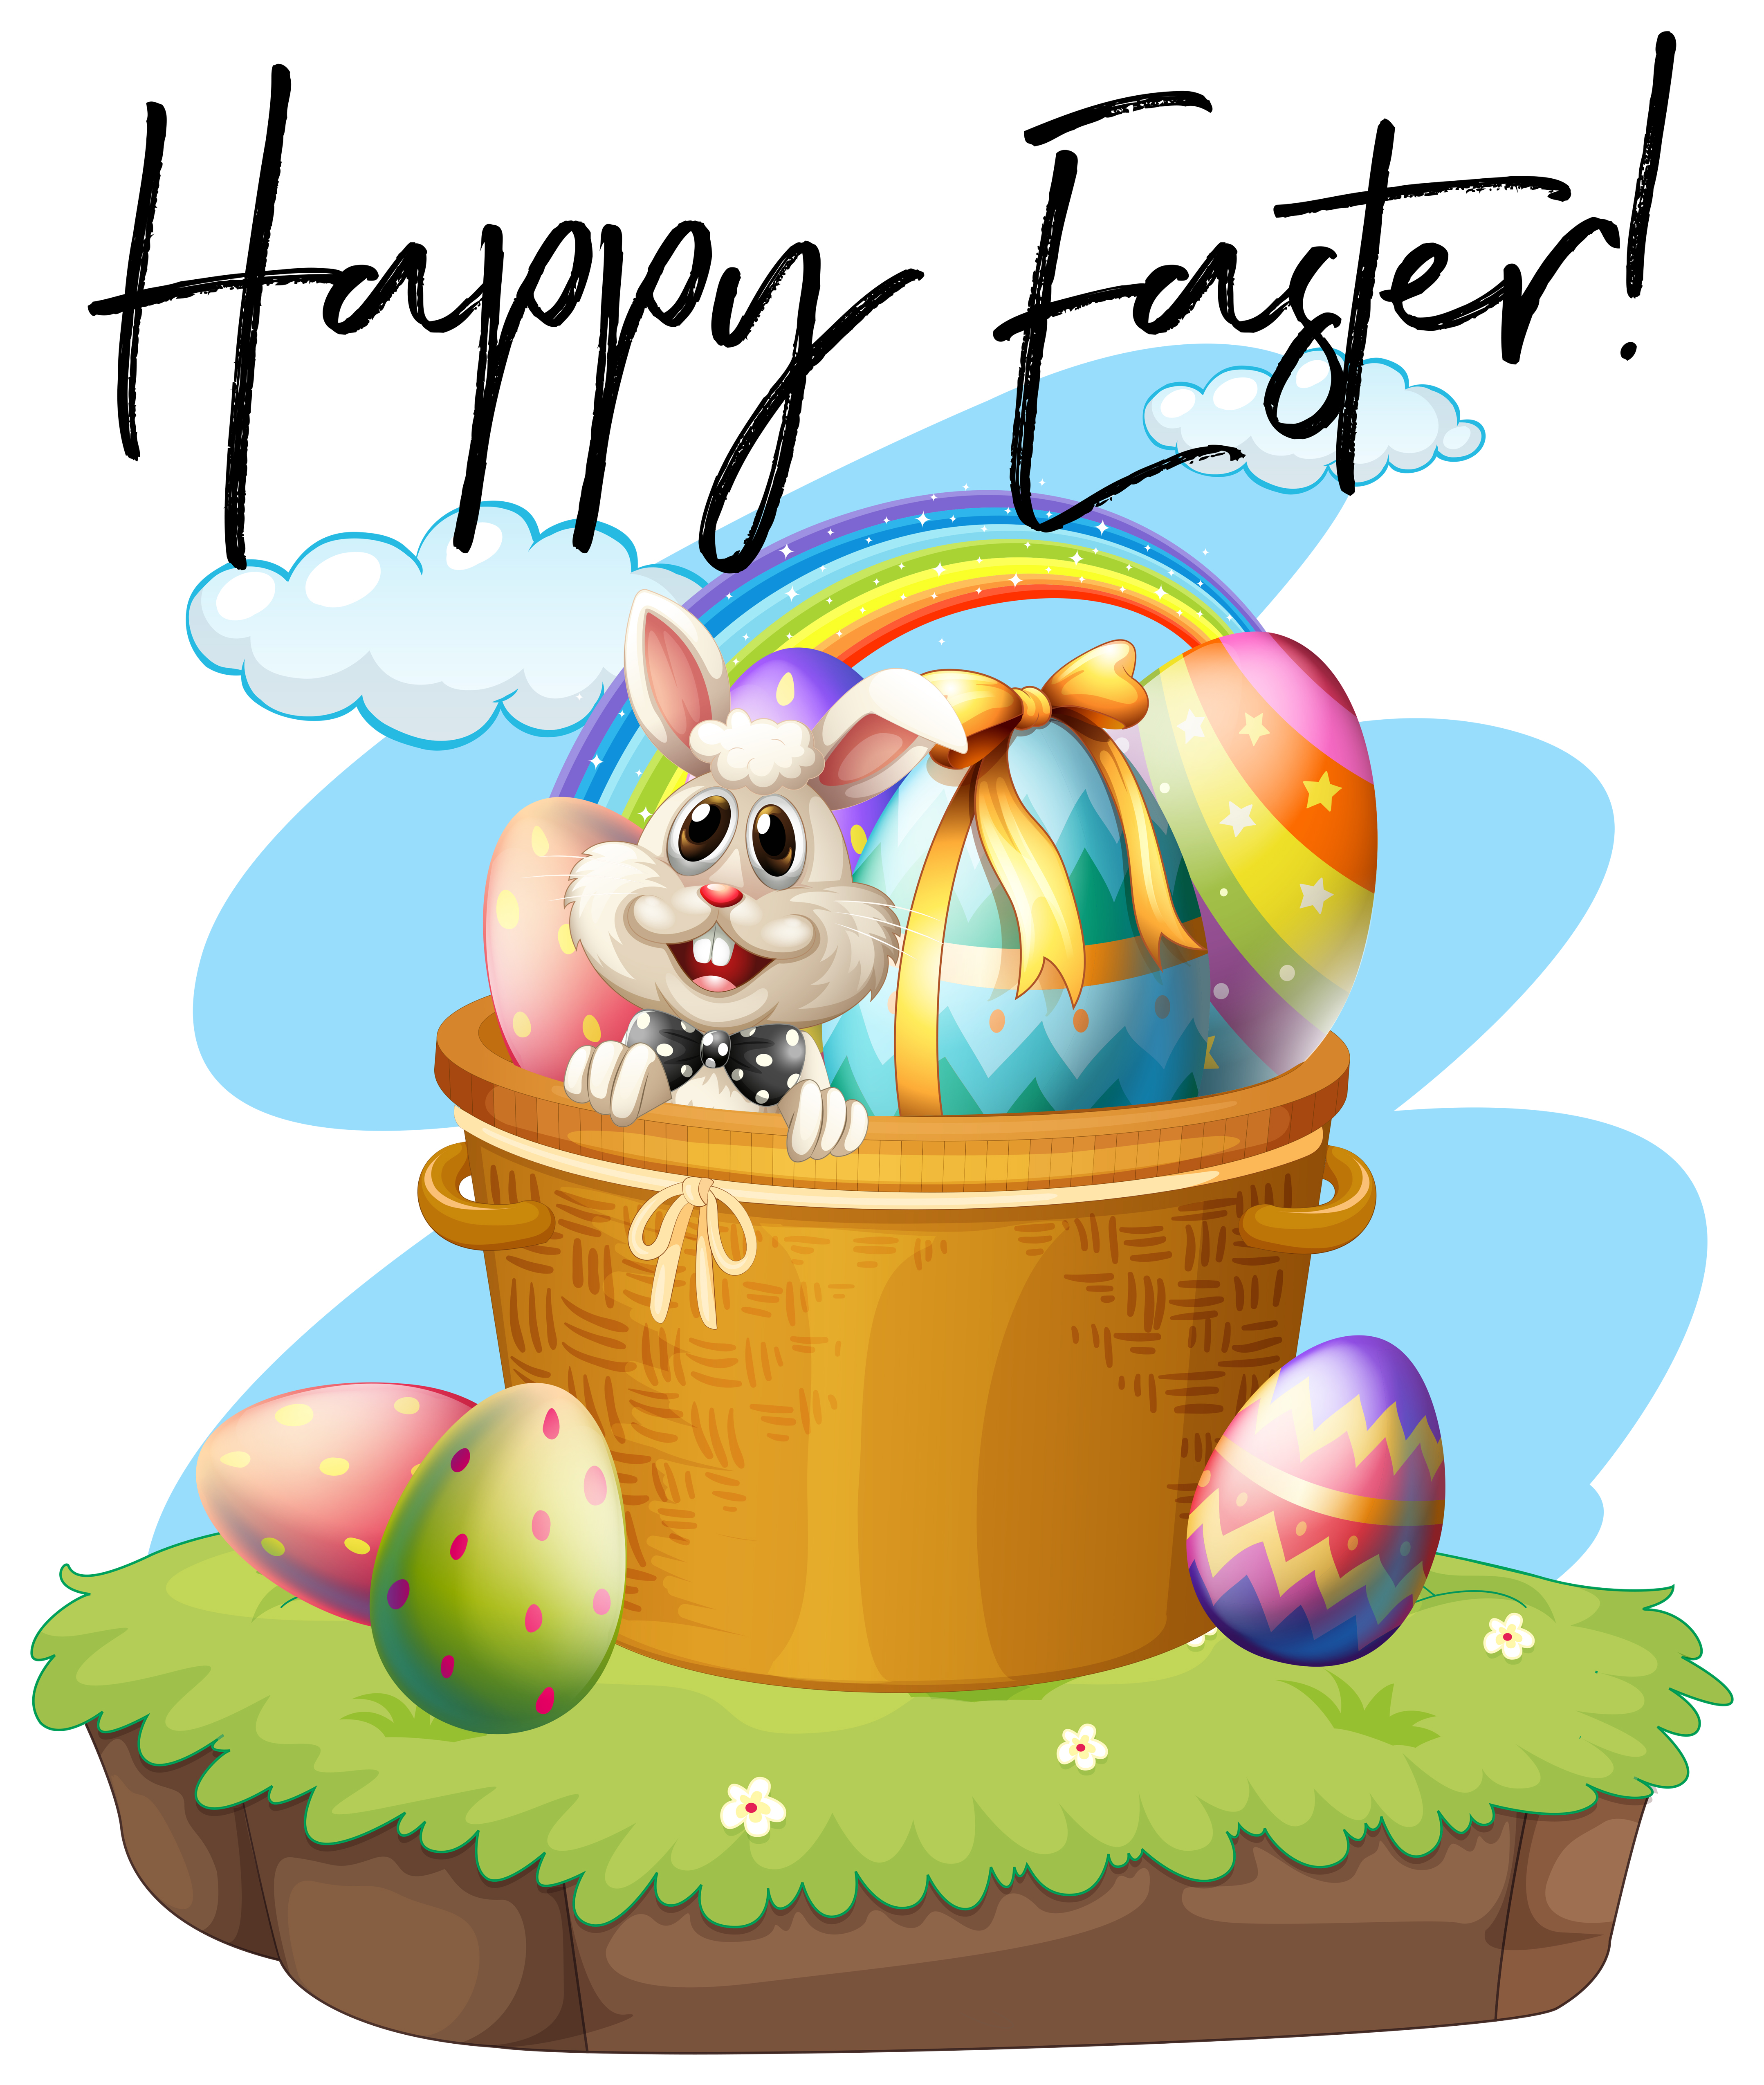 happy-easter-poster-with-bunny-and-eggs-373952-vector-art-at-vecteezy